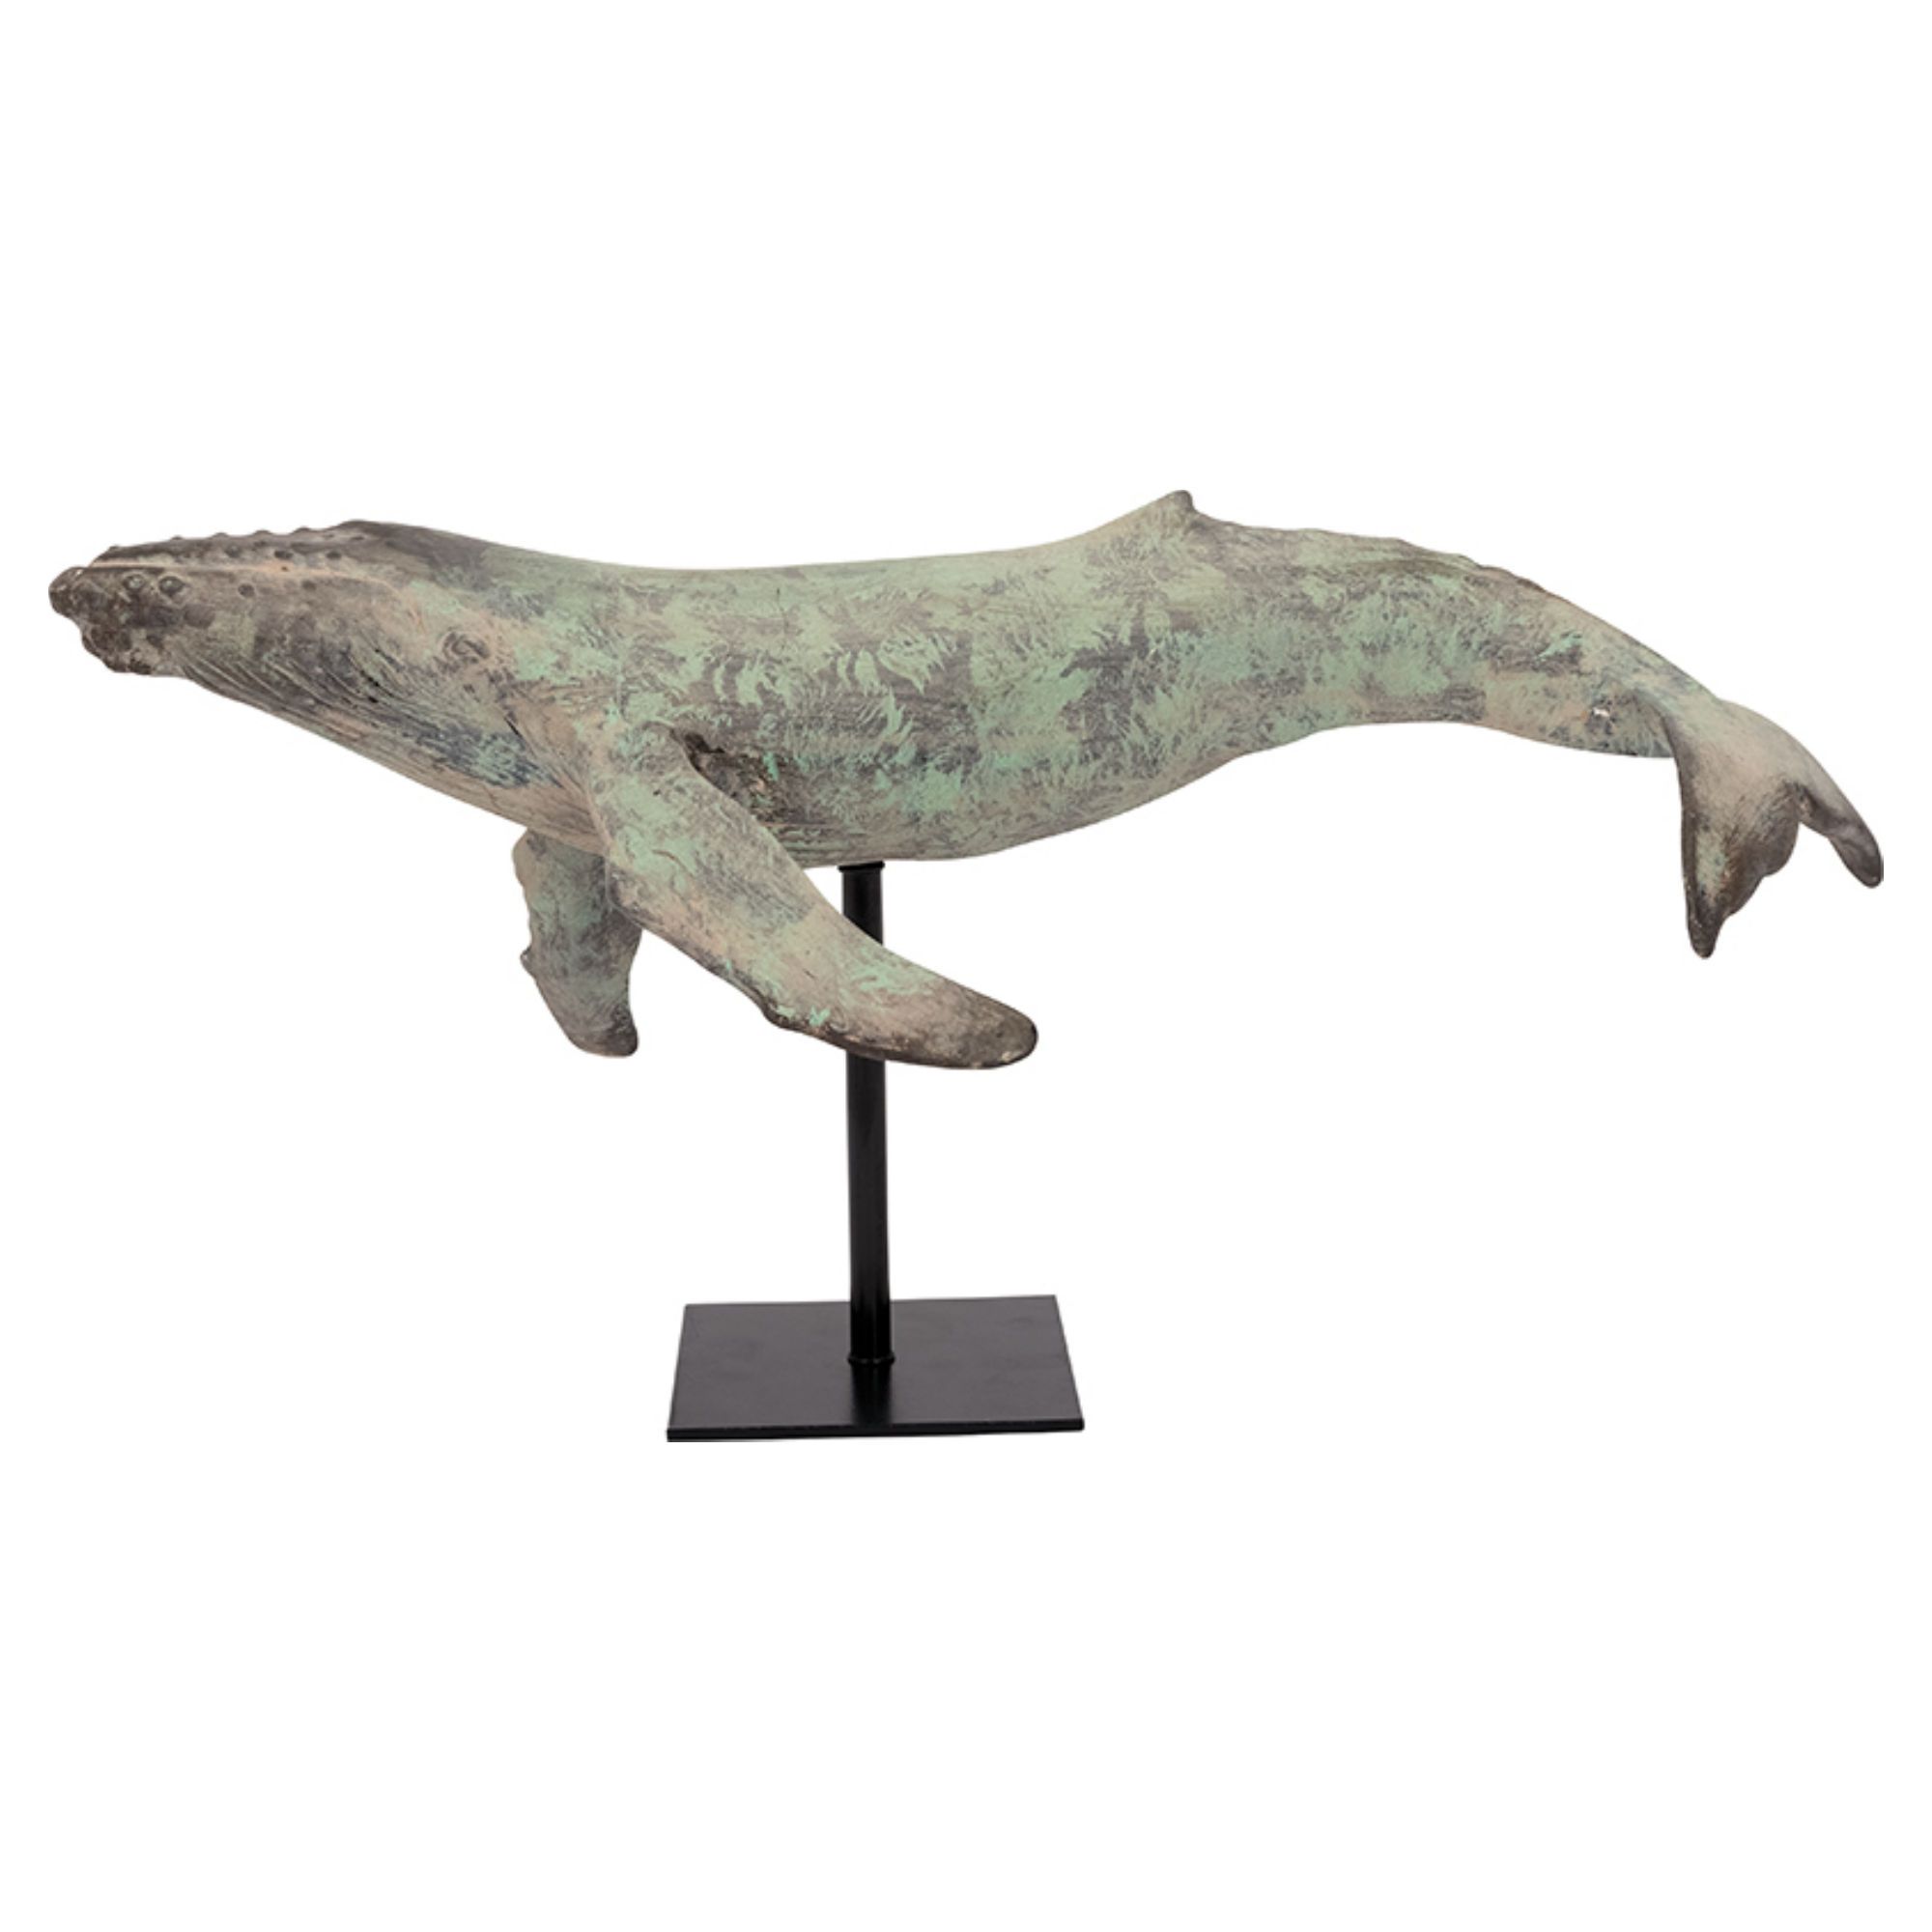 Whale on a Display Stand